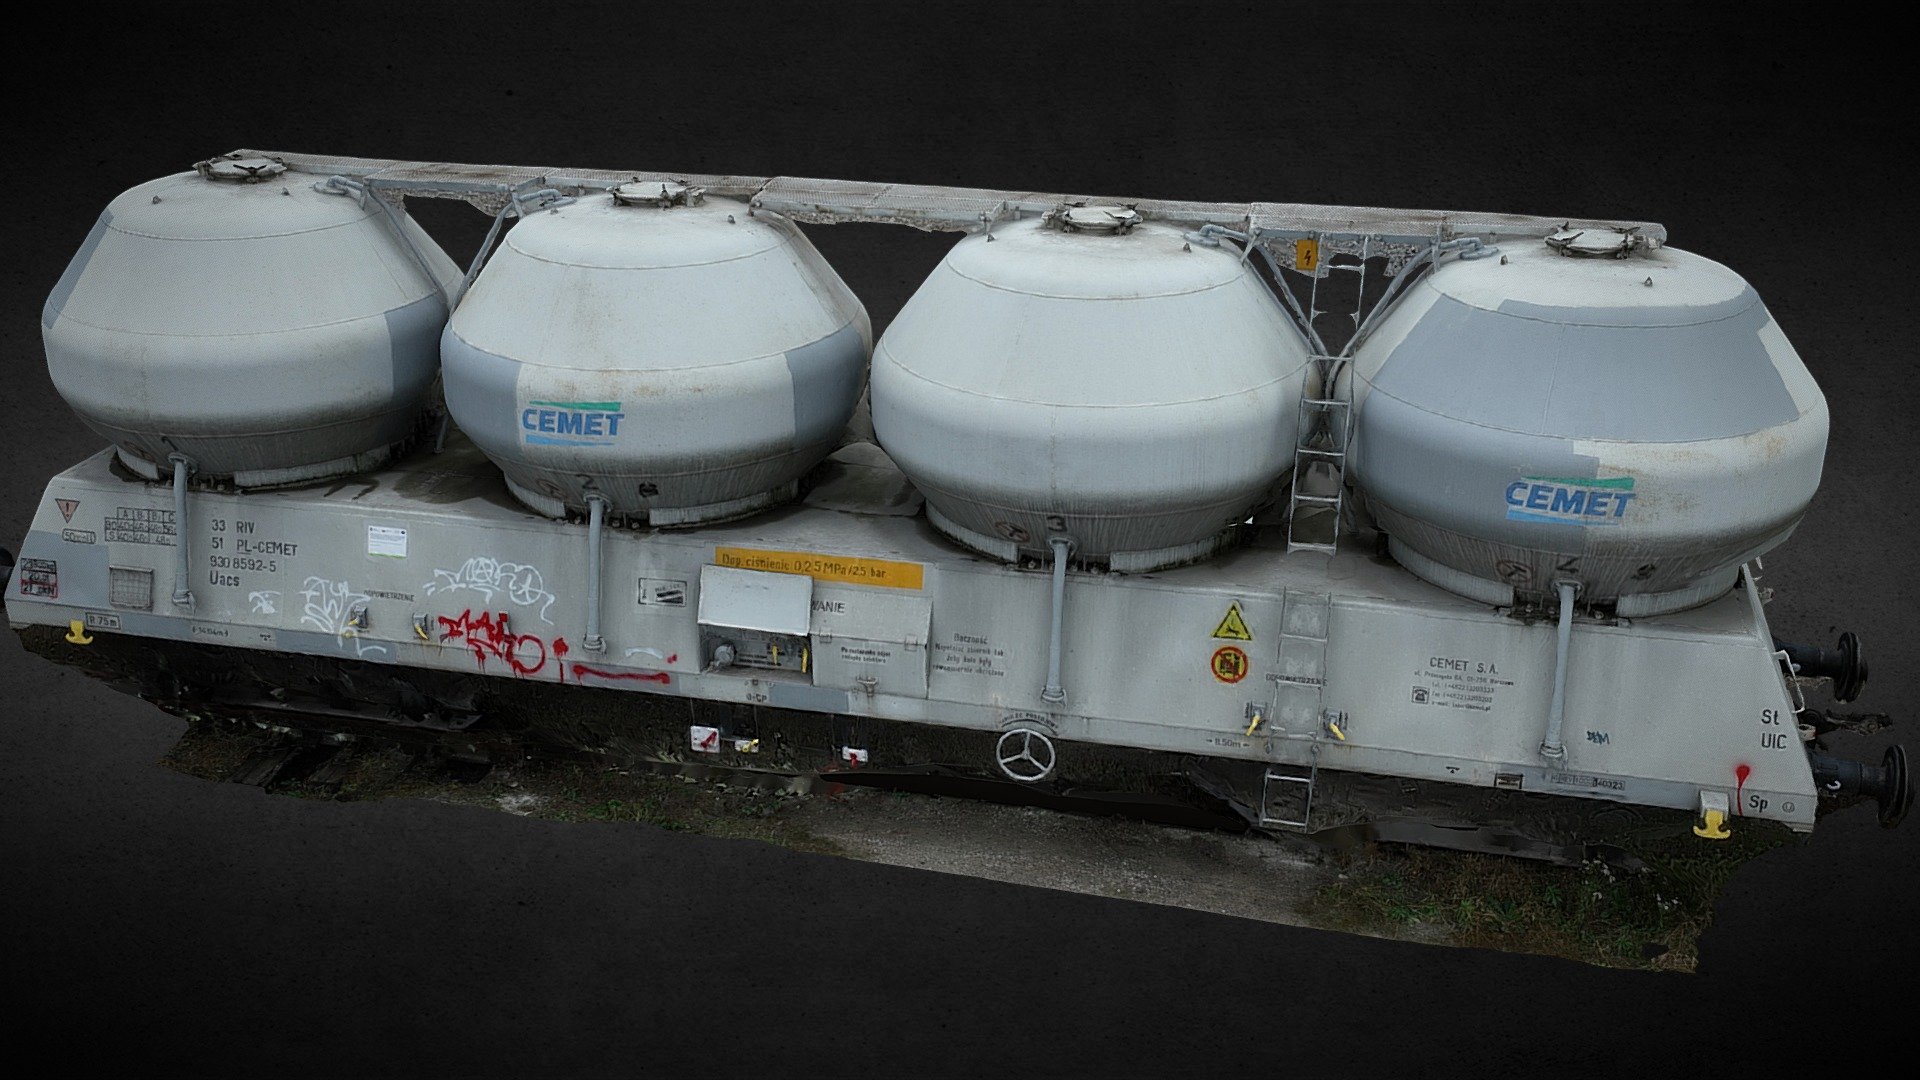 midpoly optimized mesh
maps 8k: BaseColor
maps 4k: Roughness, Disp, Nrm, Ao - cement train industrial cargo photoscan - Buy Royalty Free 3D model by scanforge (@looppy) 3d model